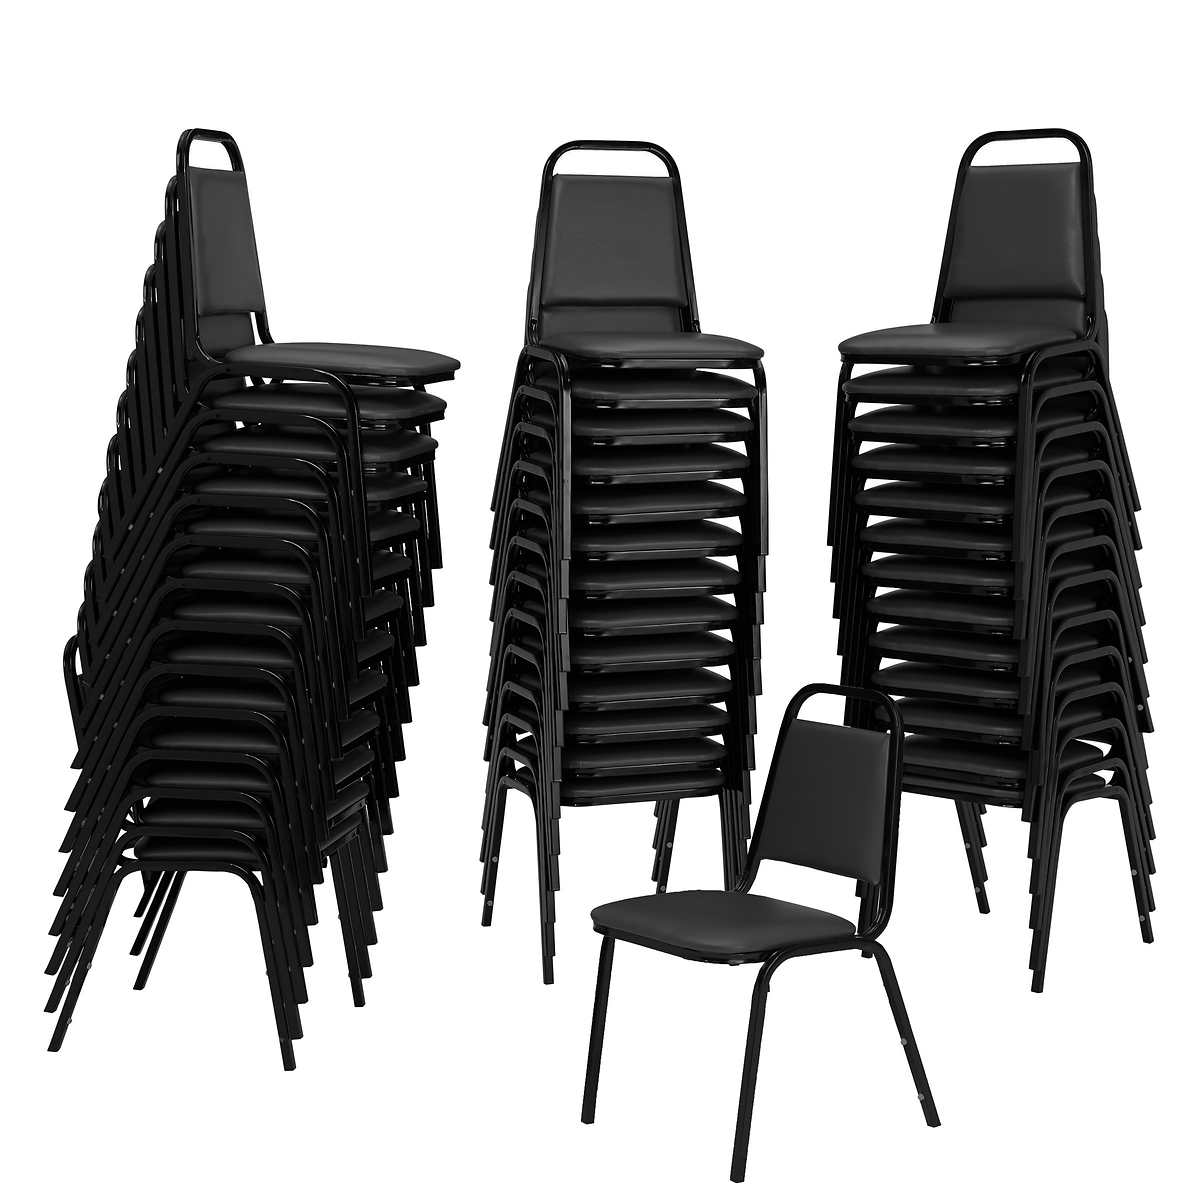 national public seating upholstered stacking chairs 40pack